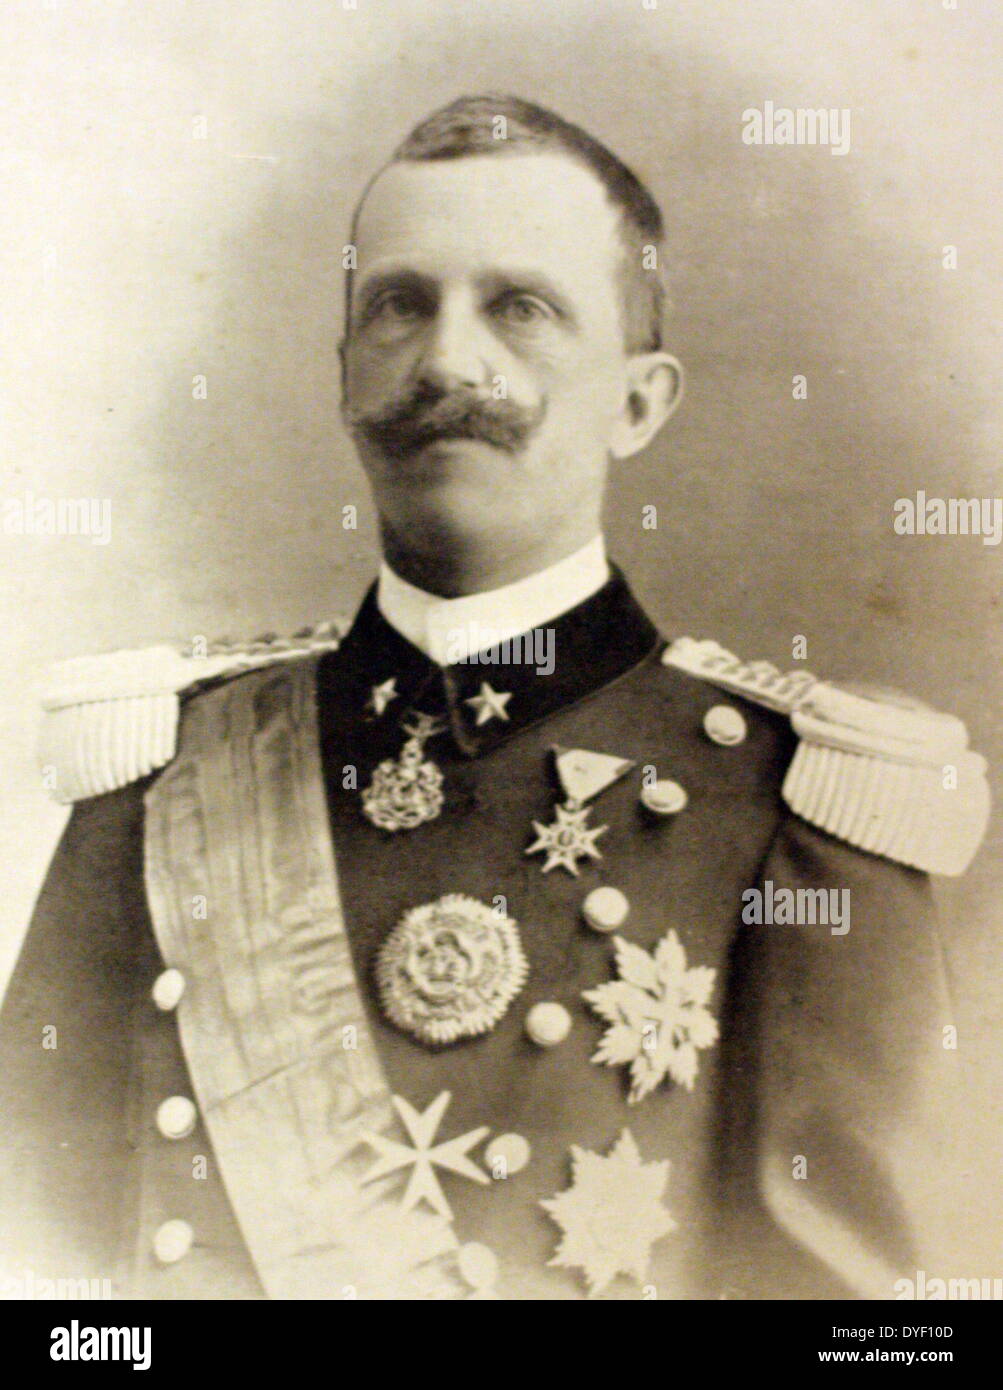 Photograph portrait of Victor Emmanuel III, King of Italy who lived between 1869 – 1947. Was a member of the House of Savoy and he claimed the thrones of Ethiopia and Albania as Emperor and King respectively. During his 46 year reign, his Kingdom was involved in two World Wars and encompassed the rise and fall of Italian Fascism. Victor Emmanuel abdicated his throne in 1946. Stock Photo